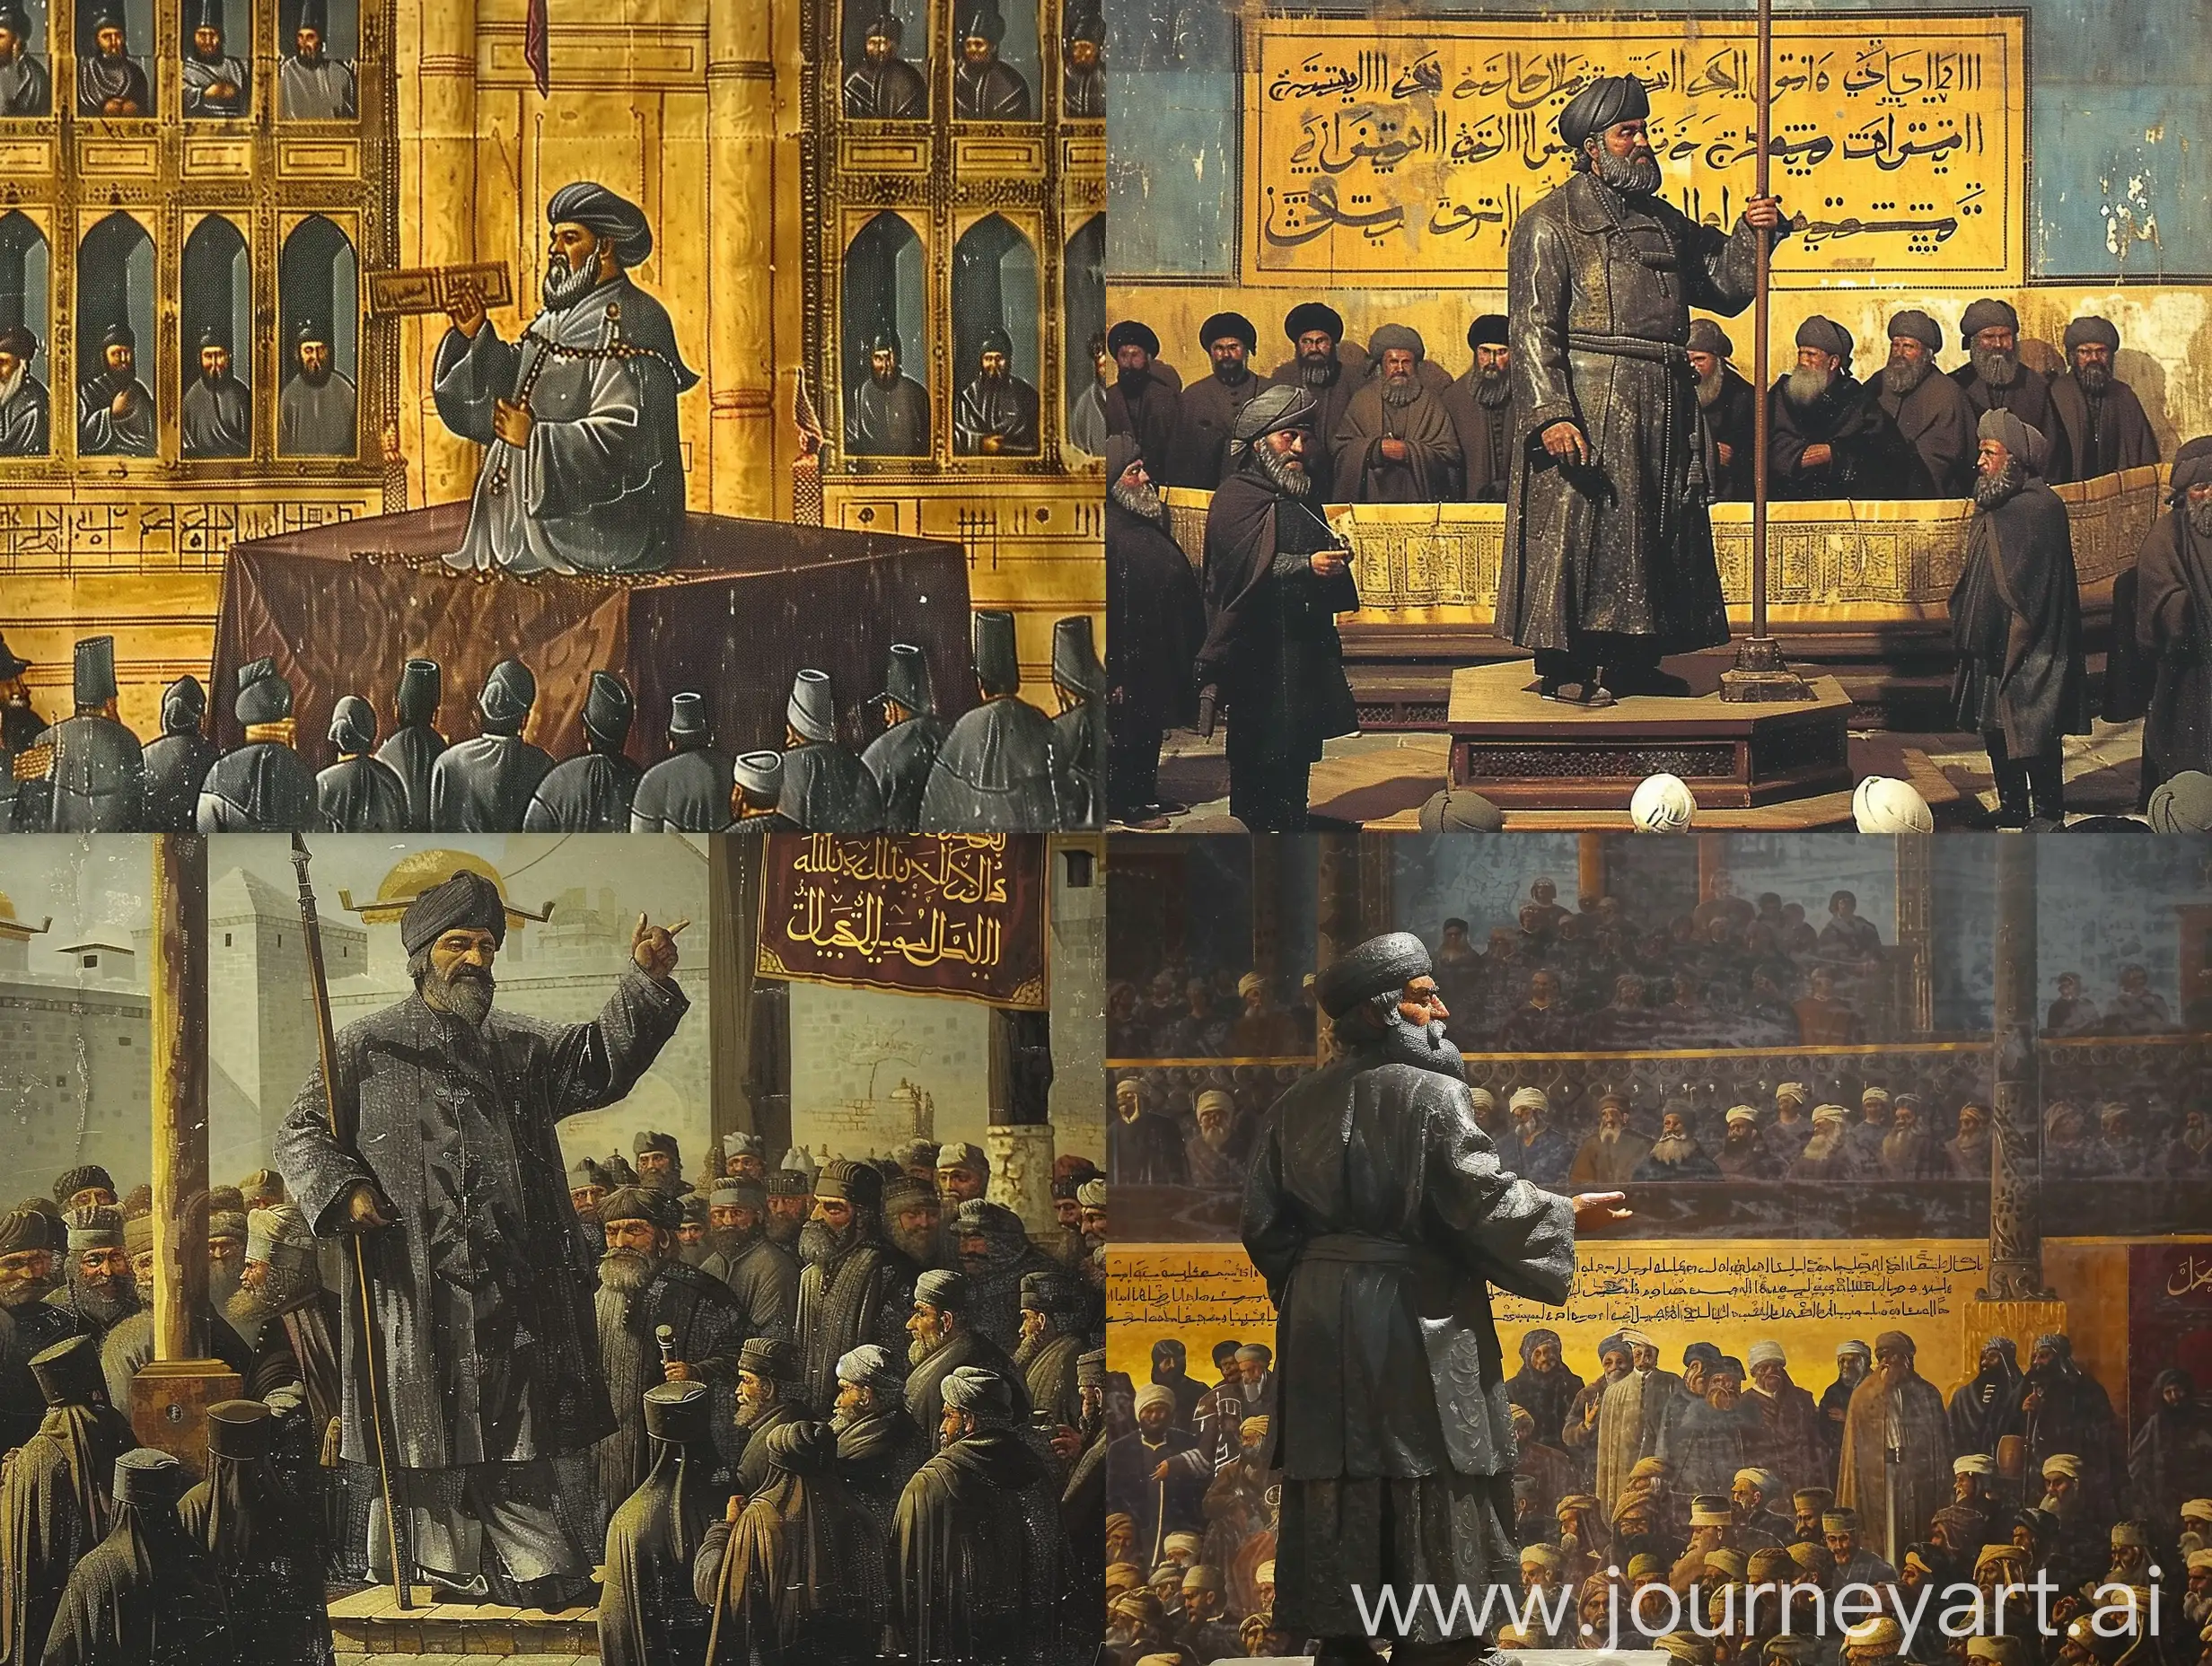 Karamanoğlu Mehmet Bey addressed all his citizens as follows:

From now on, no one should speak a word other than the Turkish language in the divan, dergâh, bergâh, assembly, square, and even everywhere (May 13, 1277).

These words of Karamanoğlu Mehmed Bey refer to a historical decision taken on May 13, 1277, ordering the use of Turkish as the official language in Anatolia. With this order, he made it compulsory to use Turkish instead of Persian, which was common in government offices and official places at that time. This decision of Mehmed Bey is of great importance for the preservation and development of Turkish language and culture and contributed to the strengthening of Turkish identity in Anatolia. At the same time, it facilitated the education of the people in their mother tongue and their communication with the administration, thus promoting social unity and integrity. This is a landmark step in Turkish history and is considered the beginning of the rise of Turkish in Anatolia.